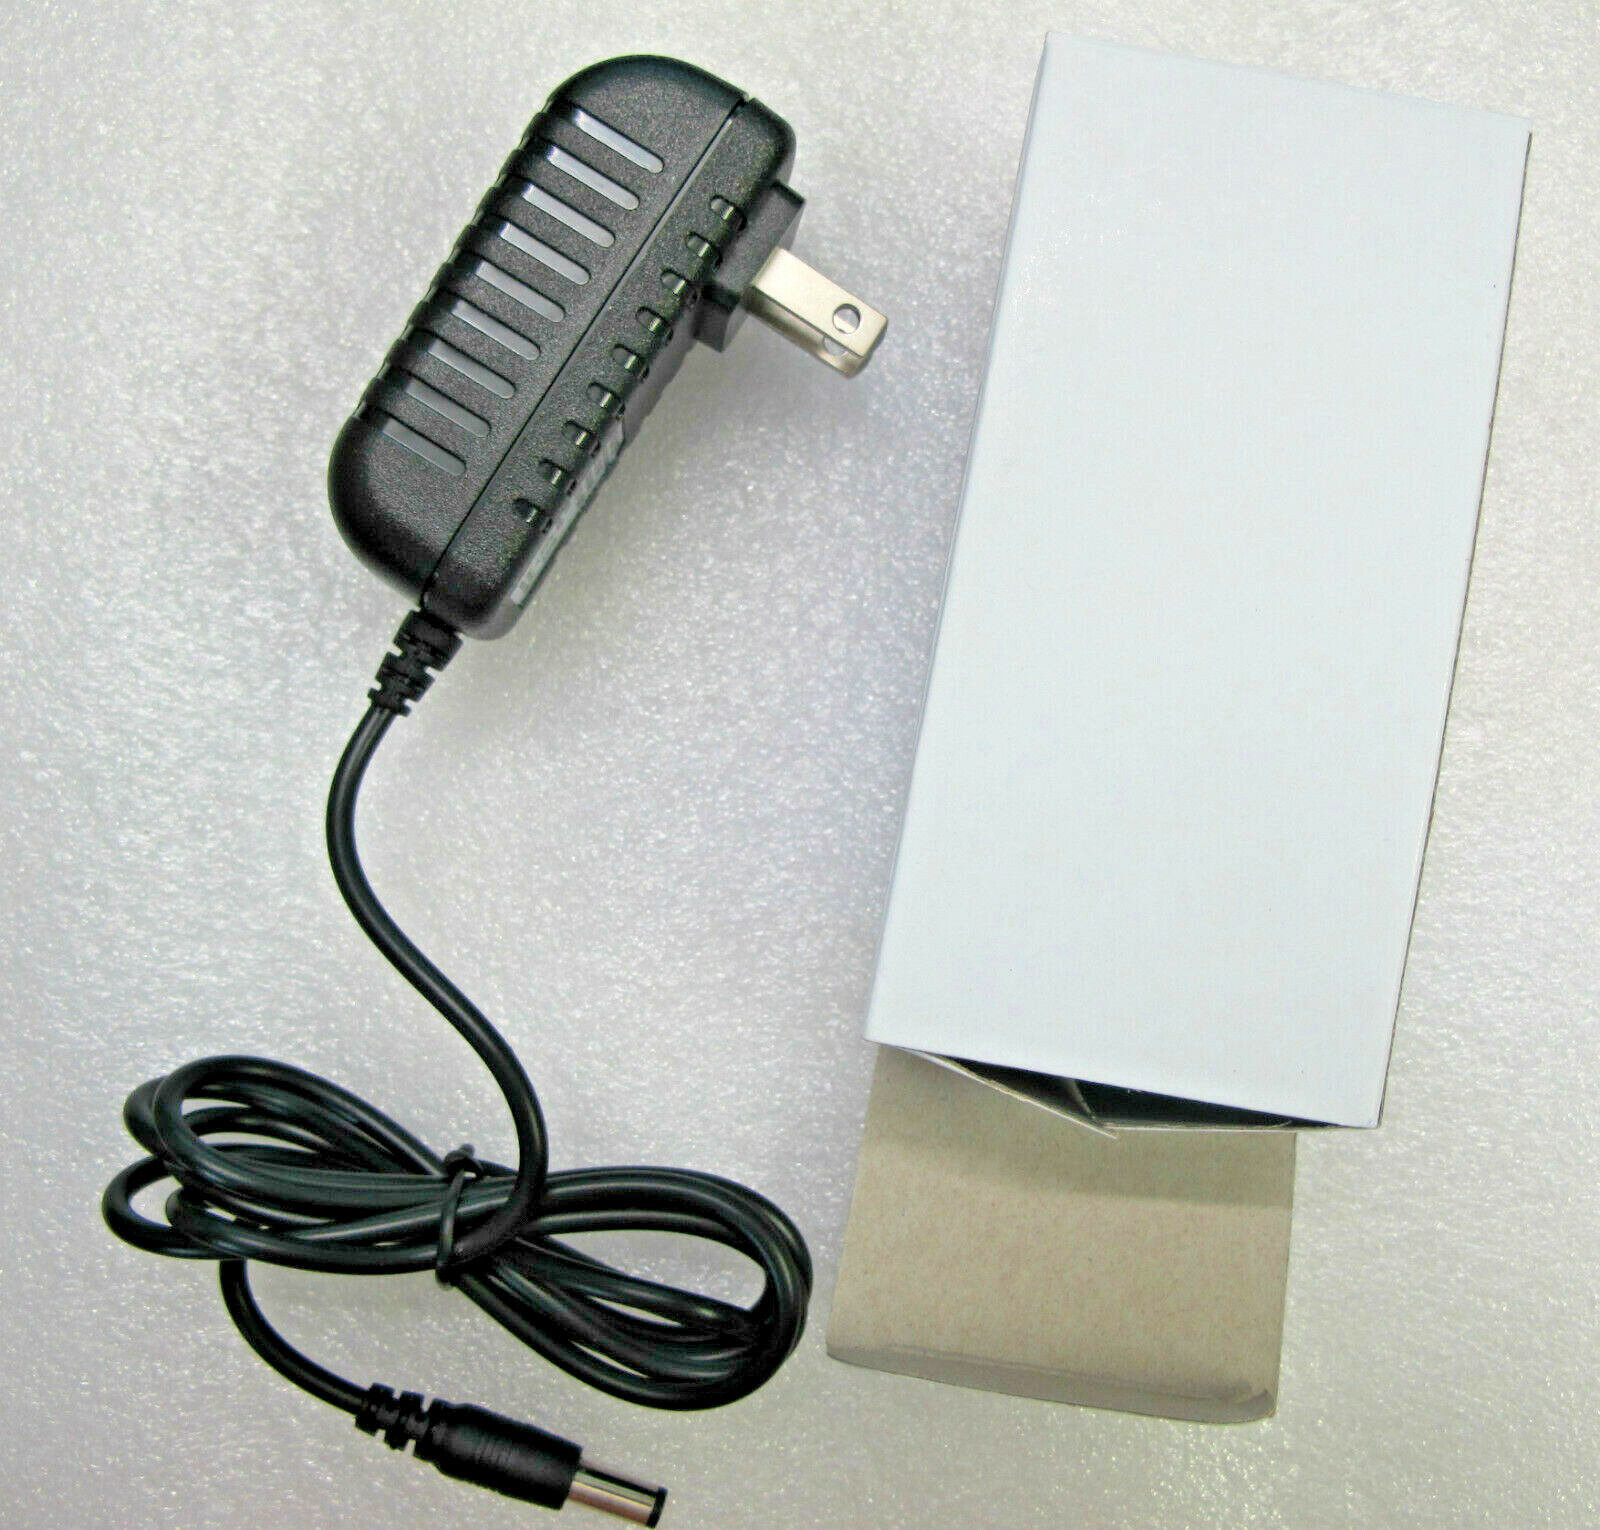 NEW AC/DC Power Supply Charger for GM Tech2 OTC BOSCH VETRONIX Scanner Scan Tool Manufacturer Part Number 3000113, 3000